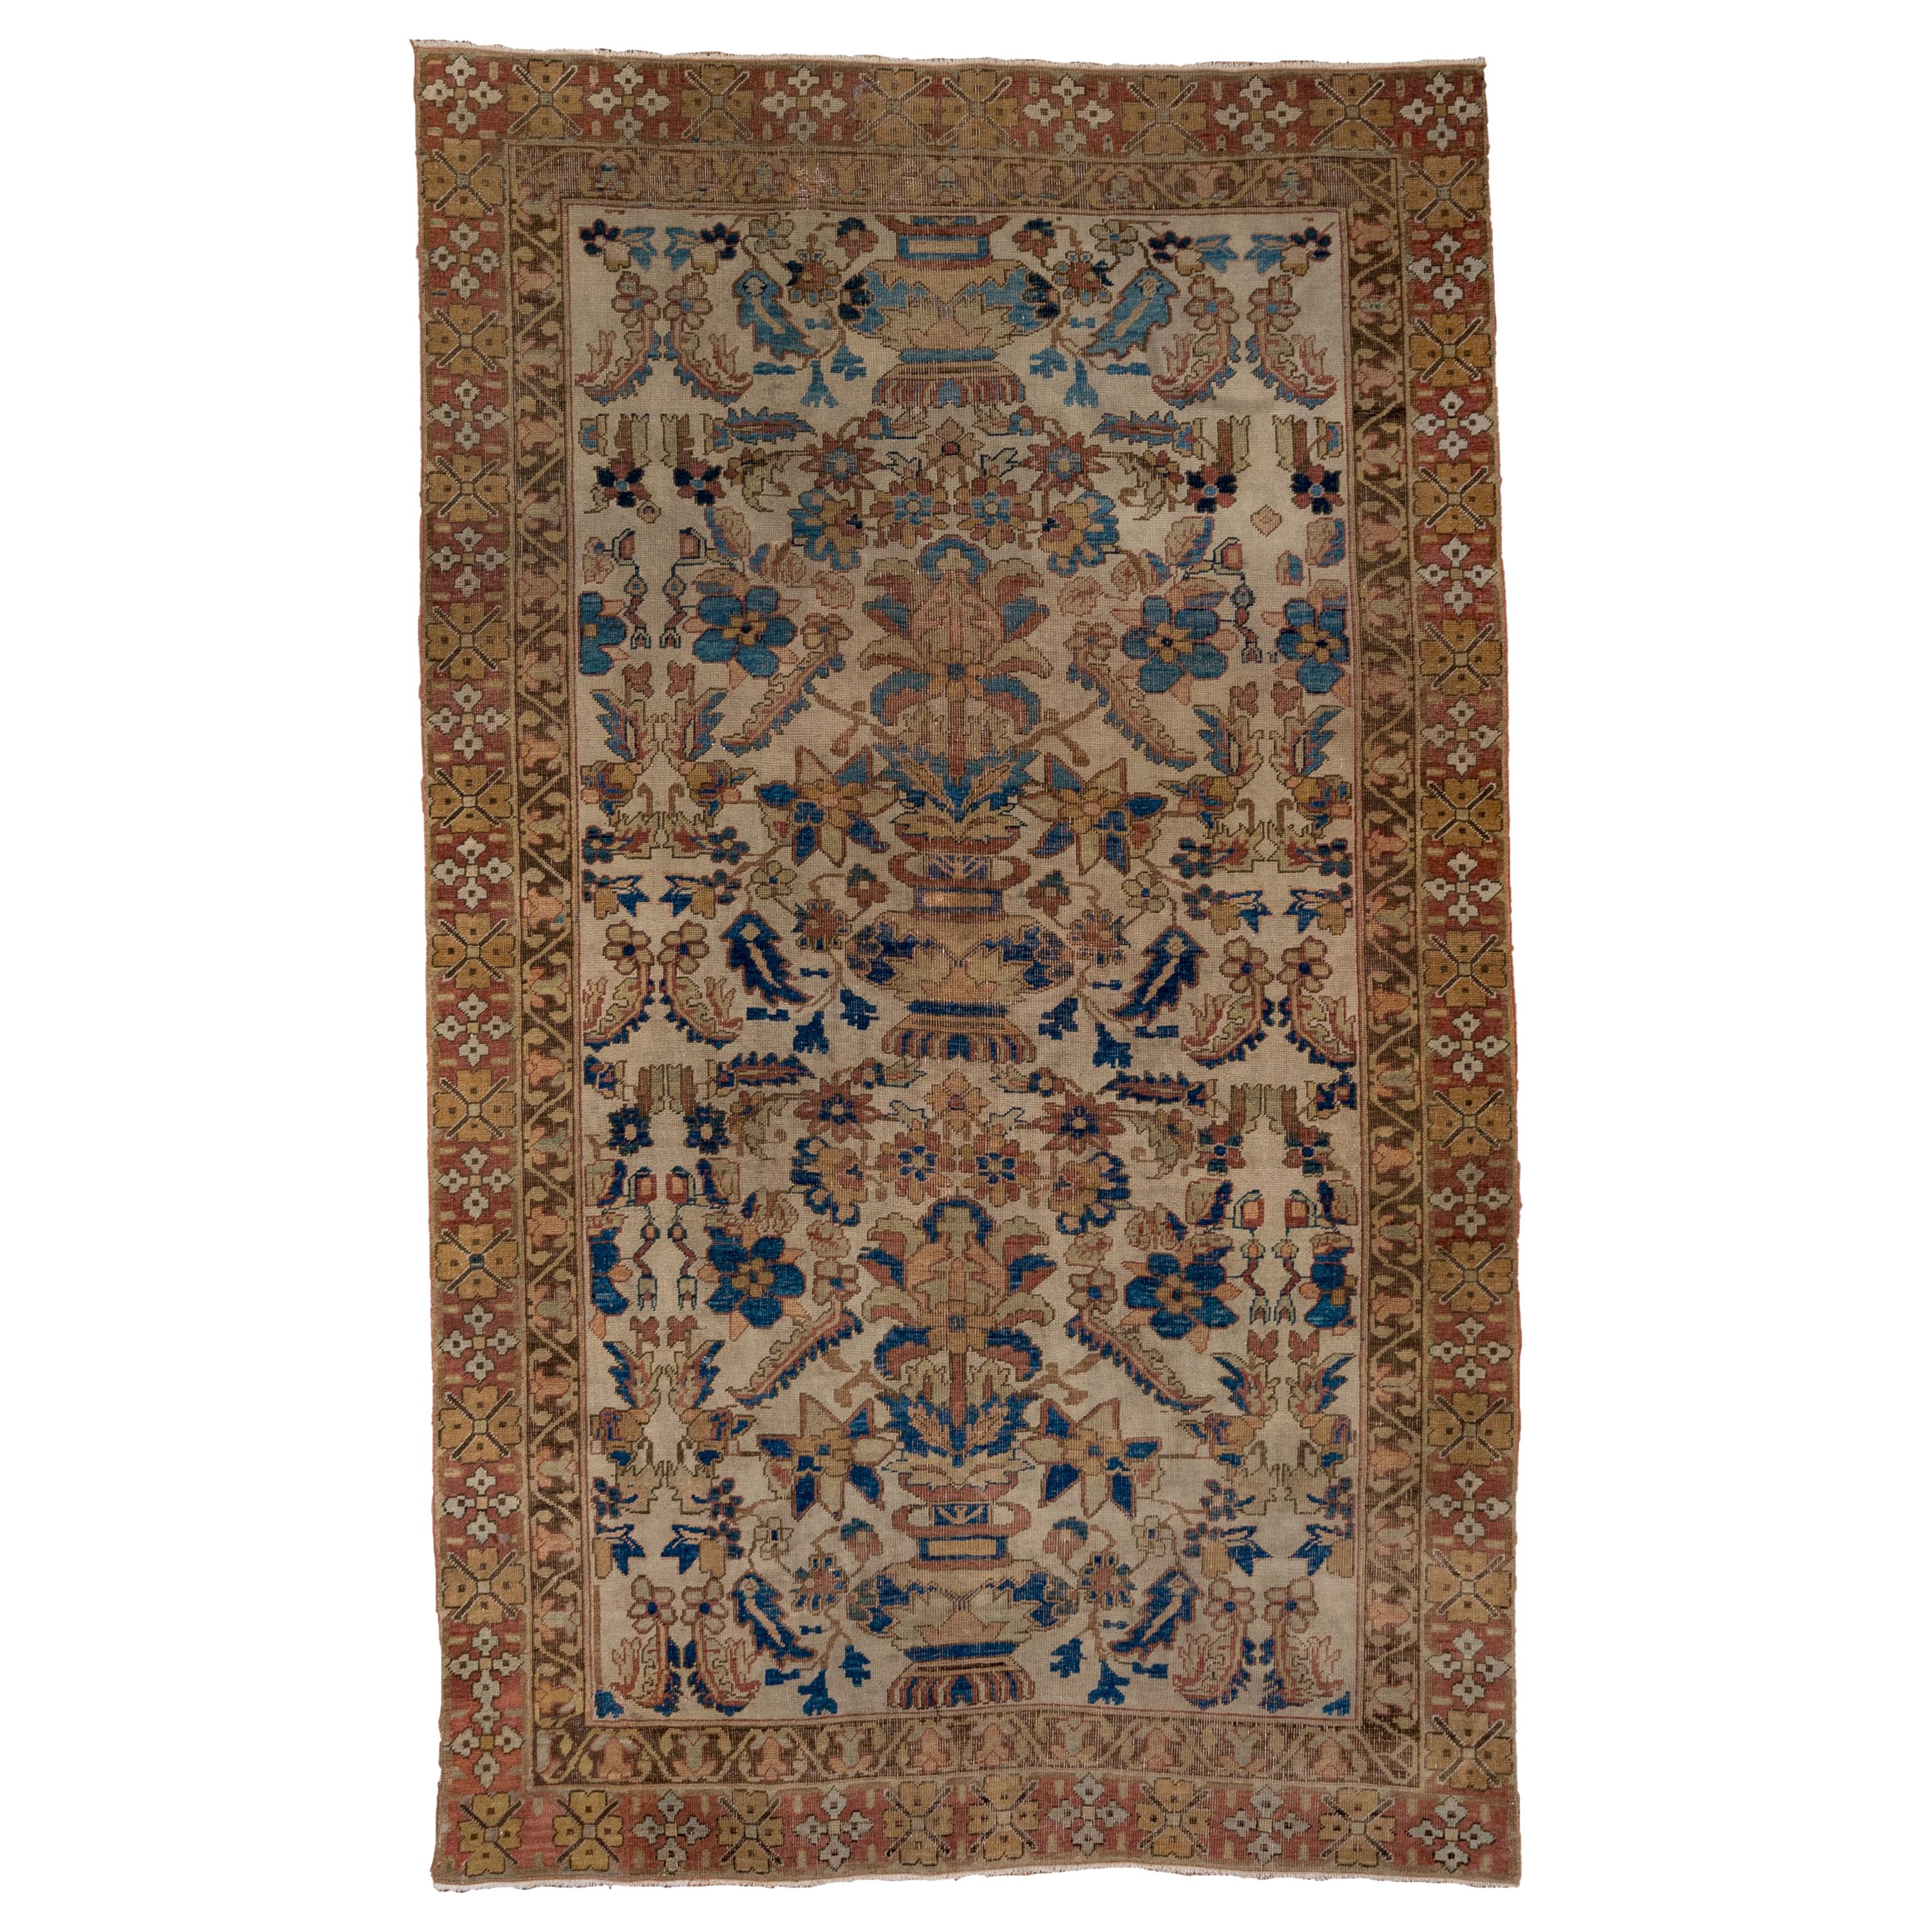 Antique Persian Afshar Rug, All-Over Field, Gold and Coral Borders, circa 1920s